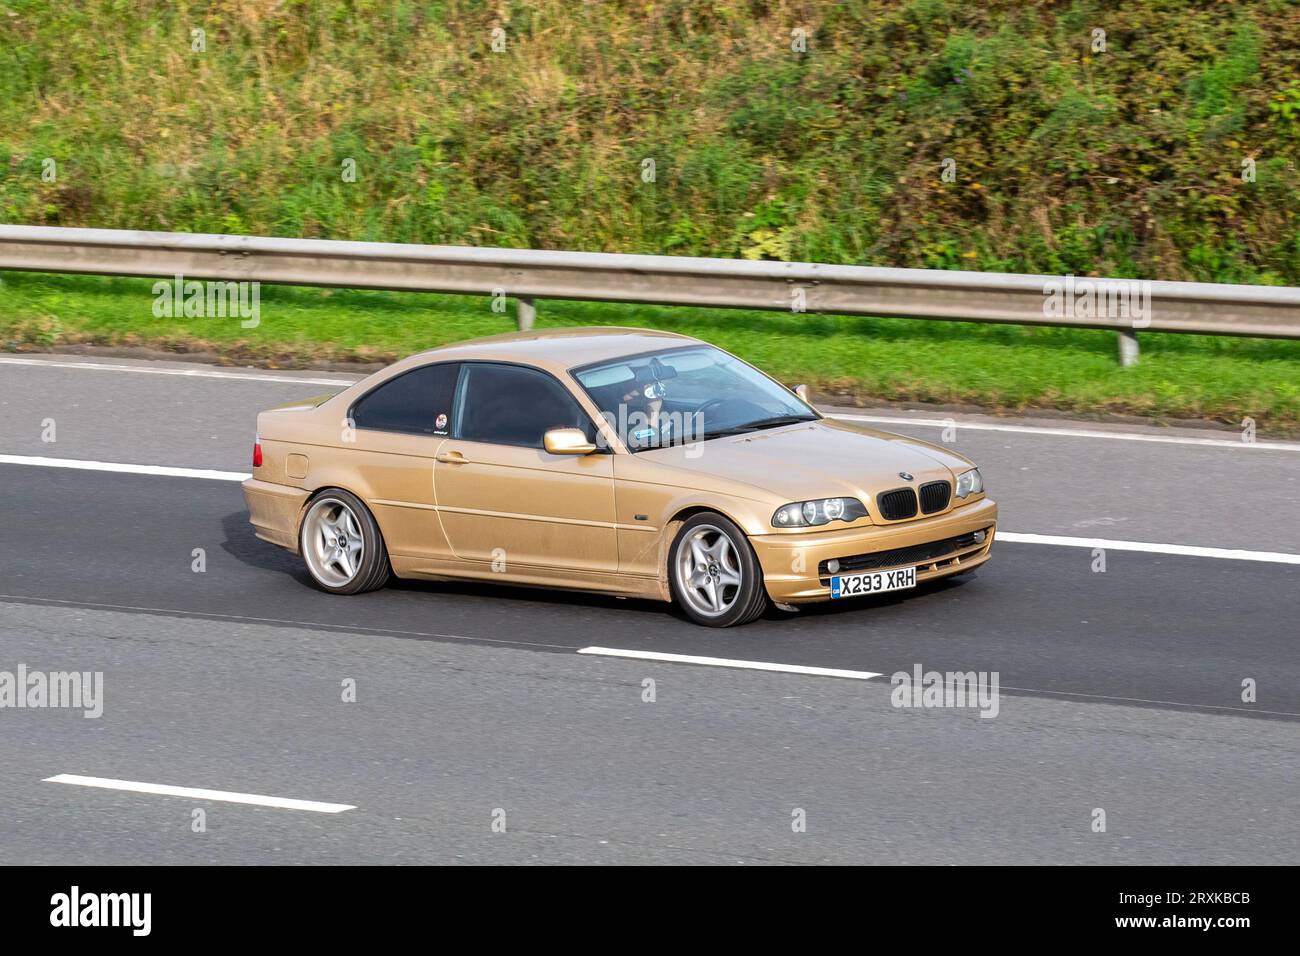 2000 BMW 318I Gold saloon car Petrol 1895 cc, left hand drive 4-door sedan body; travelling at speed on the M6 motorway in Greater Manchester, UK Stock Photo